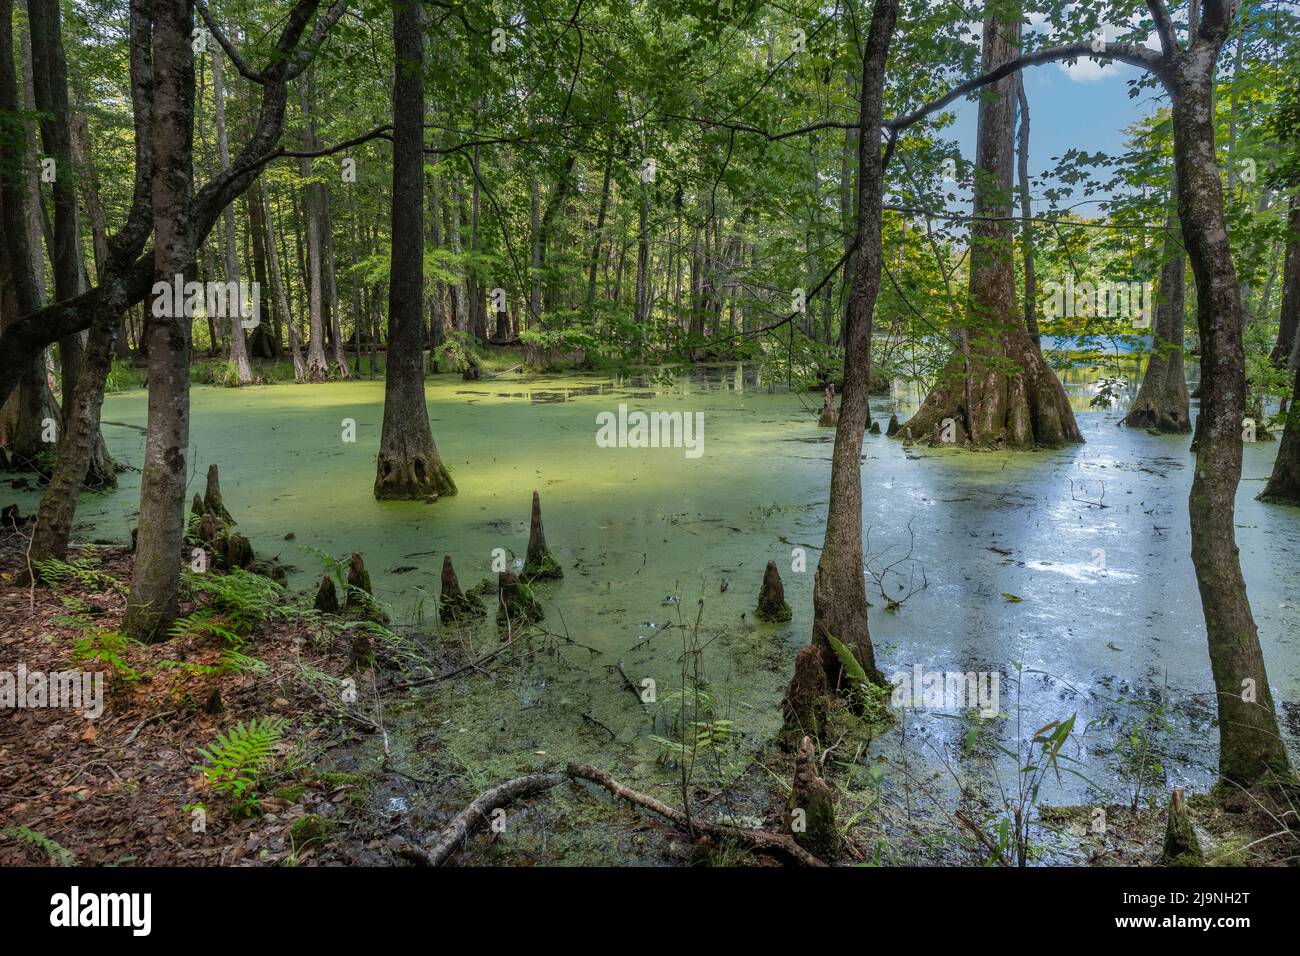 Shoreline of Merchant's Millpond State Park in northeastern North Carolina in late May. Water covered in common duckweed (Lemma minor). Dominant trees Stock Photo